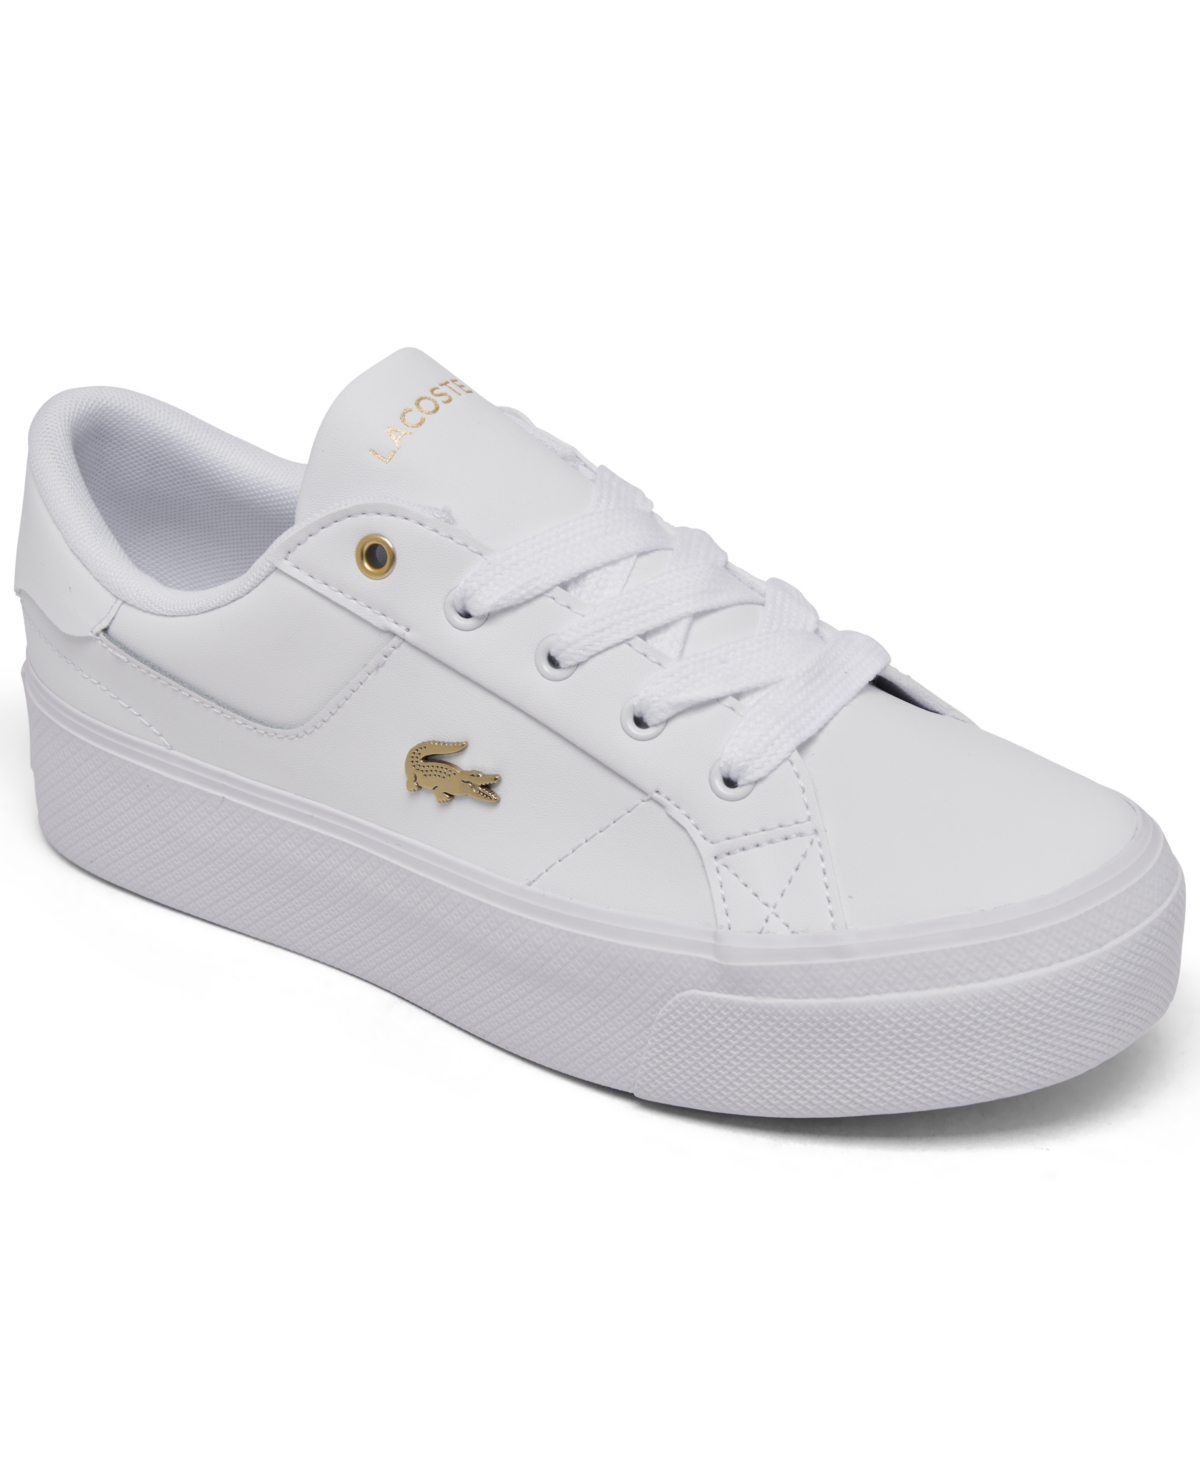 Women's Ziane Logo Leather Casual Sneakers from Finish Line - White/gold